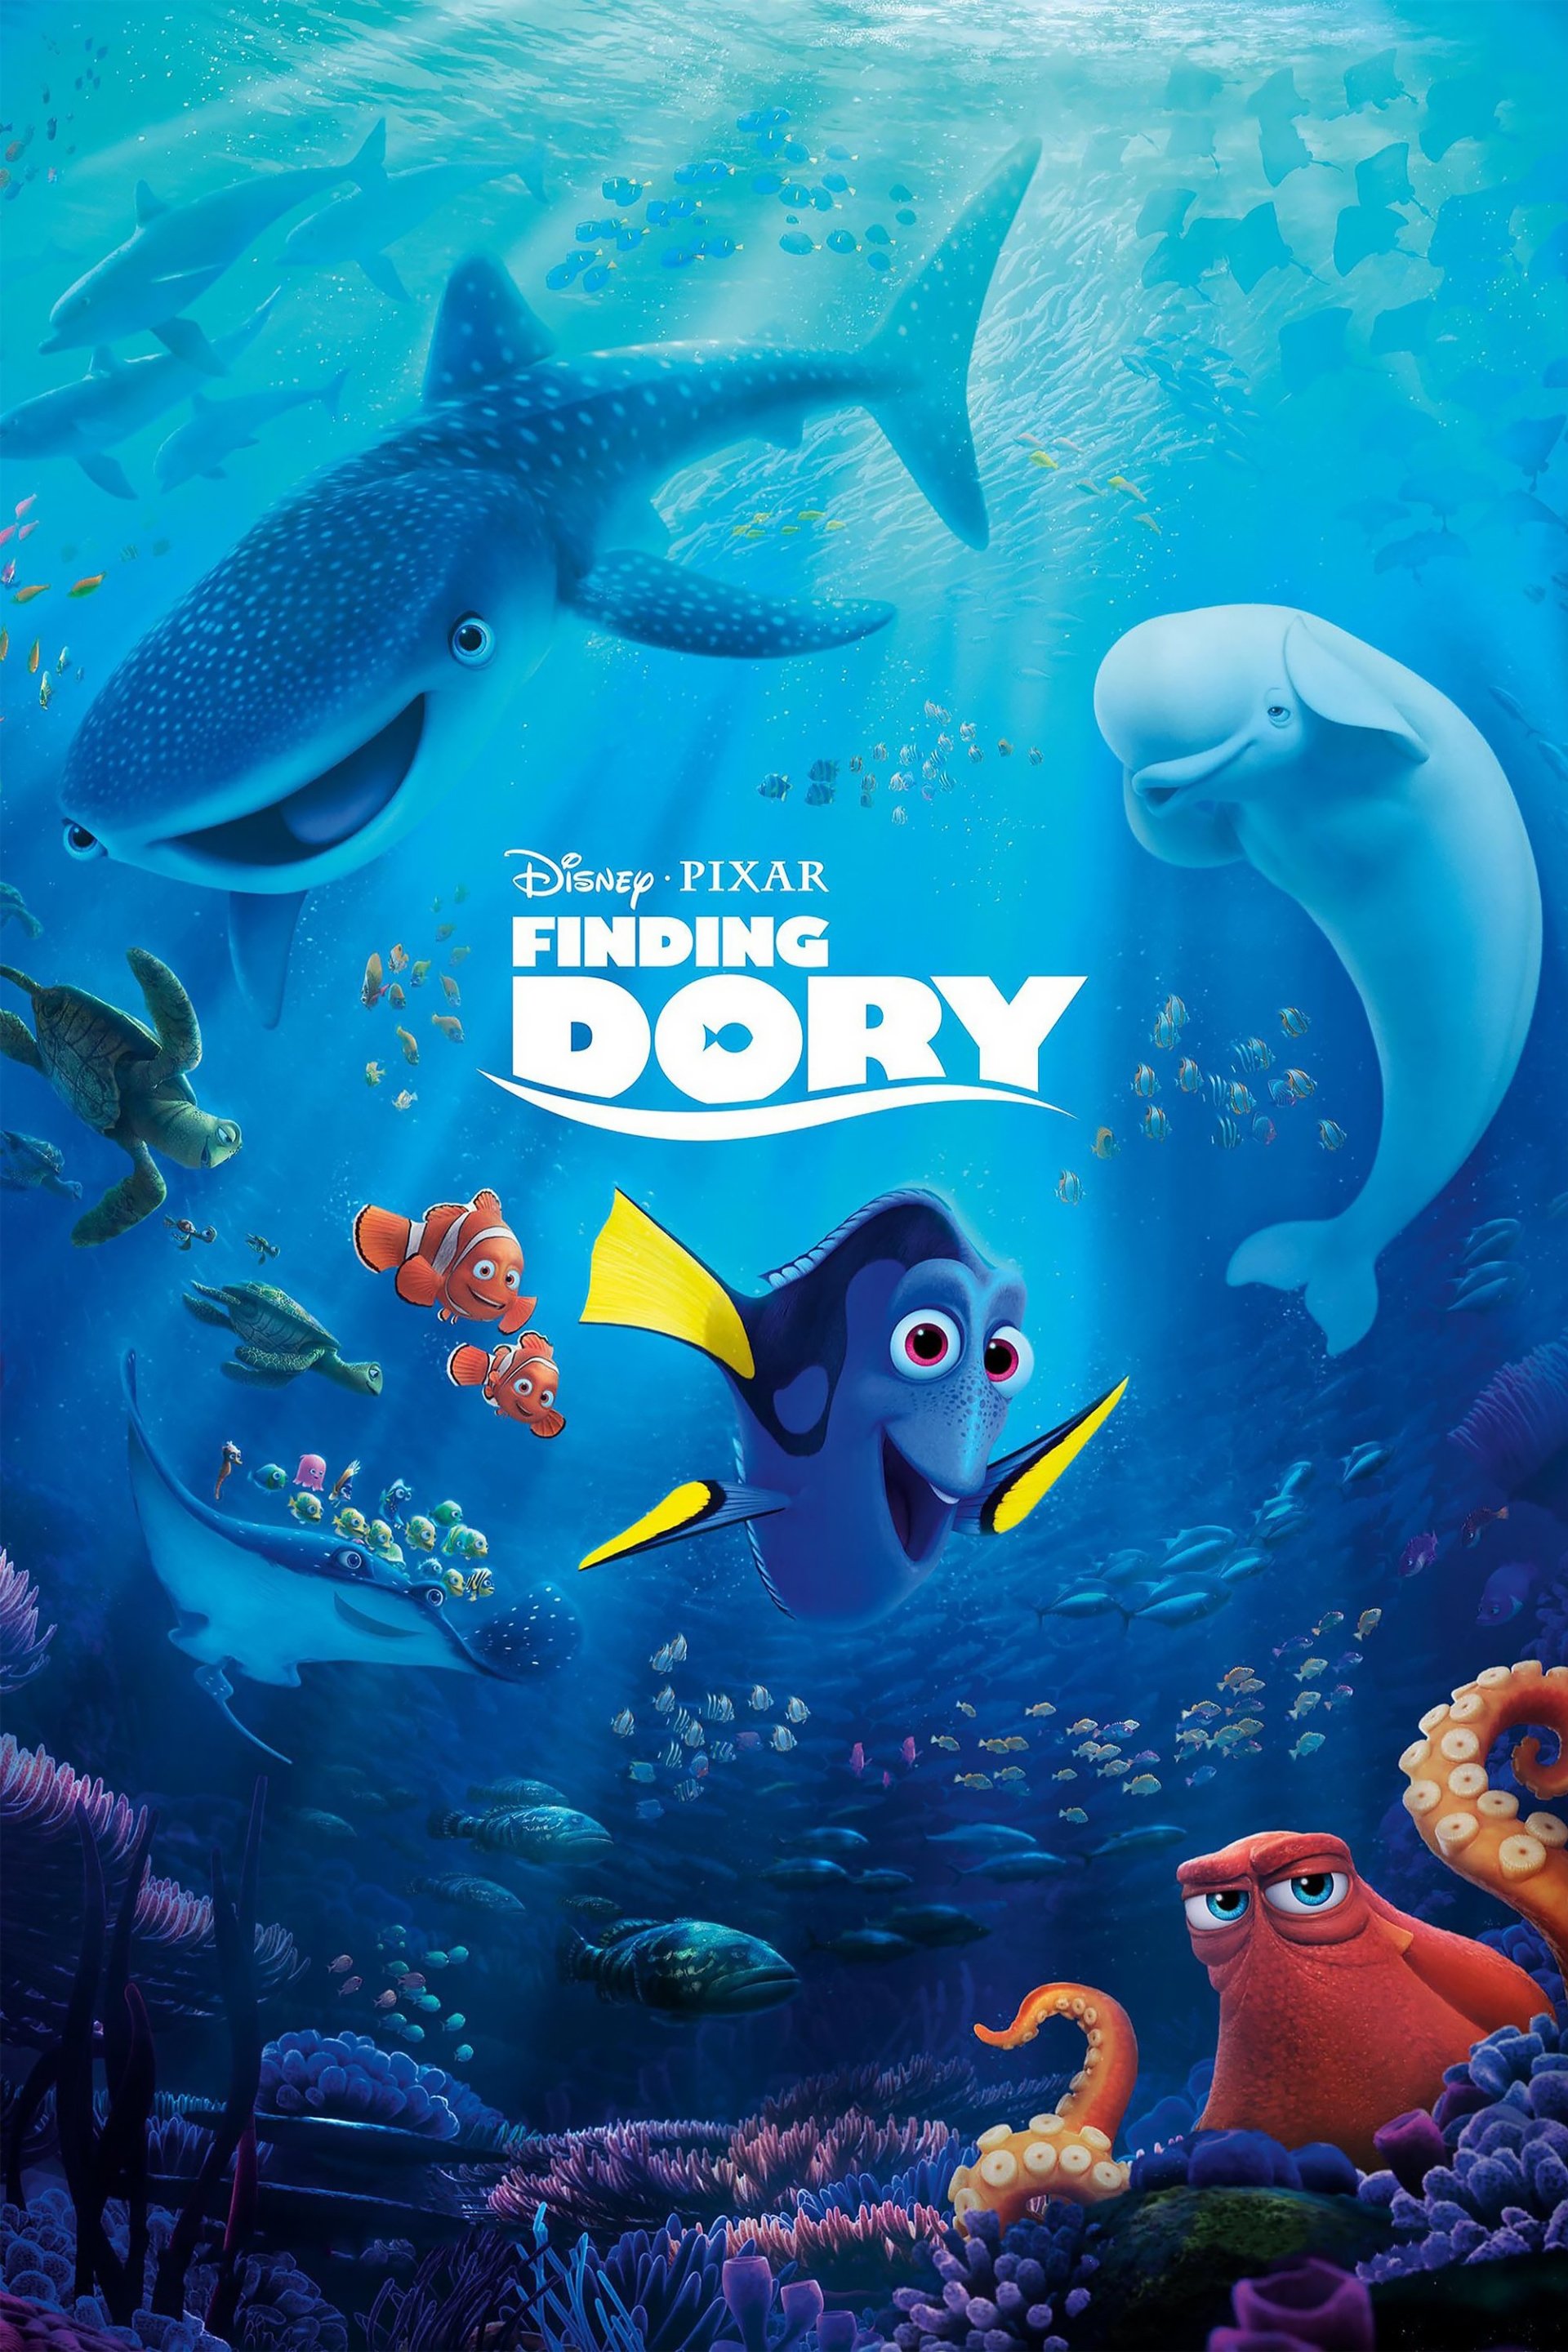  Finding  Dory  Movie  Poster ID 147207 Image Abyss